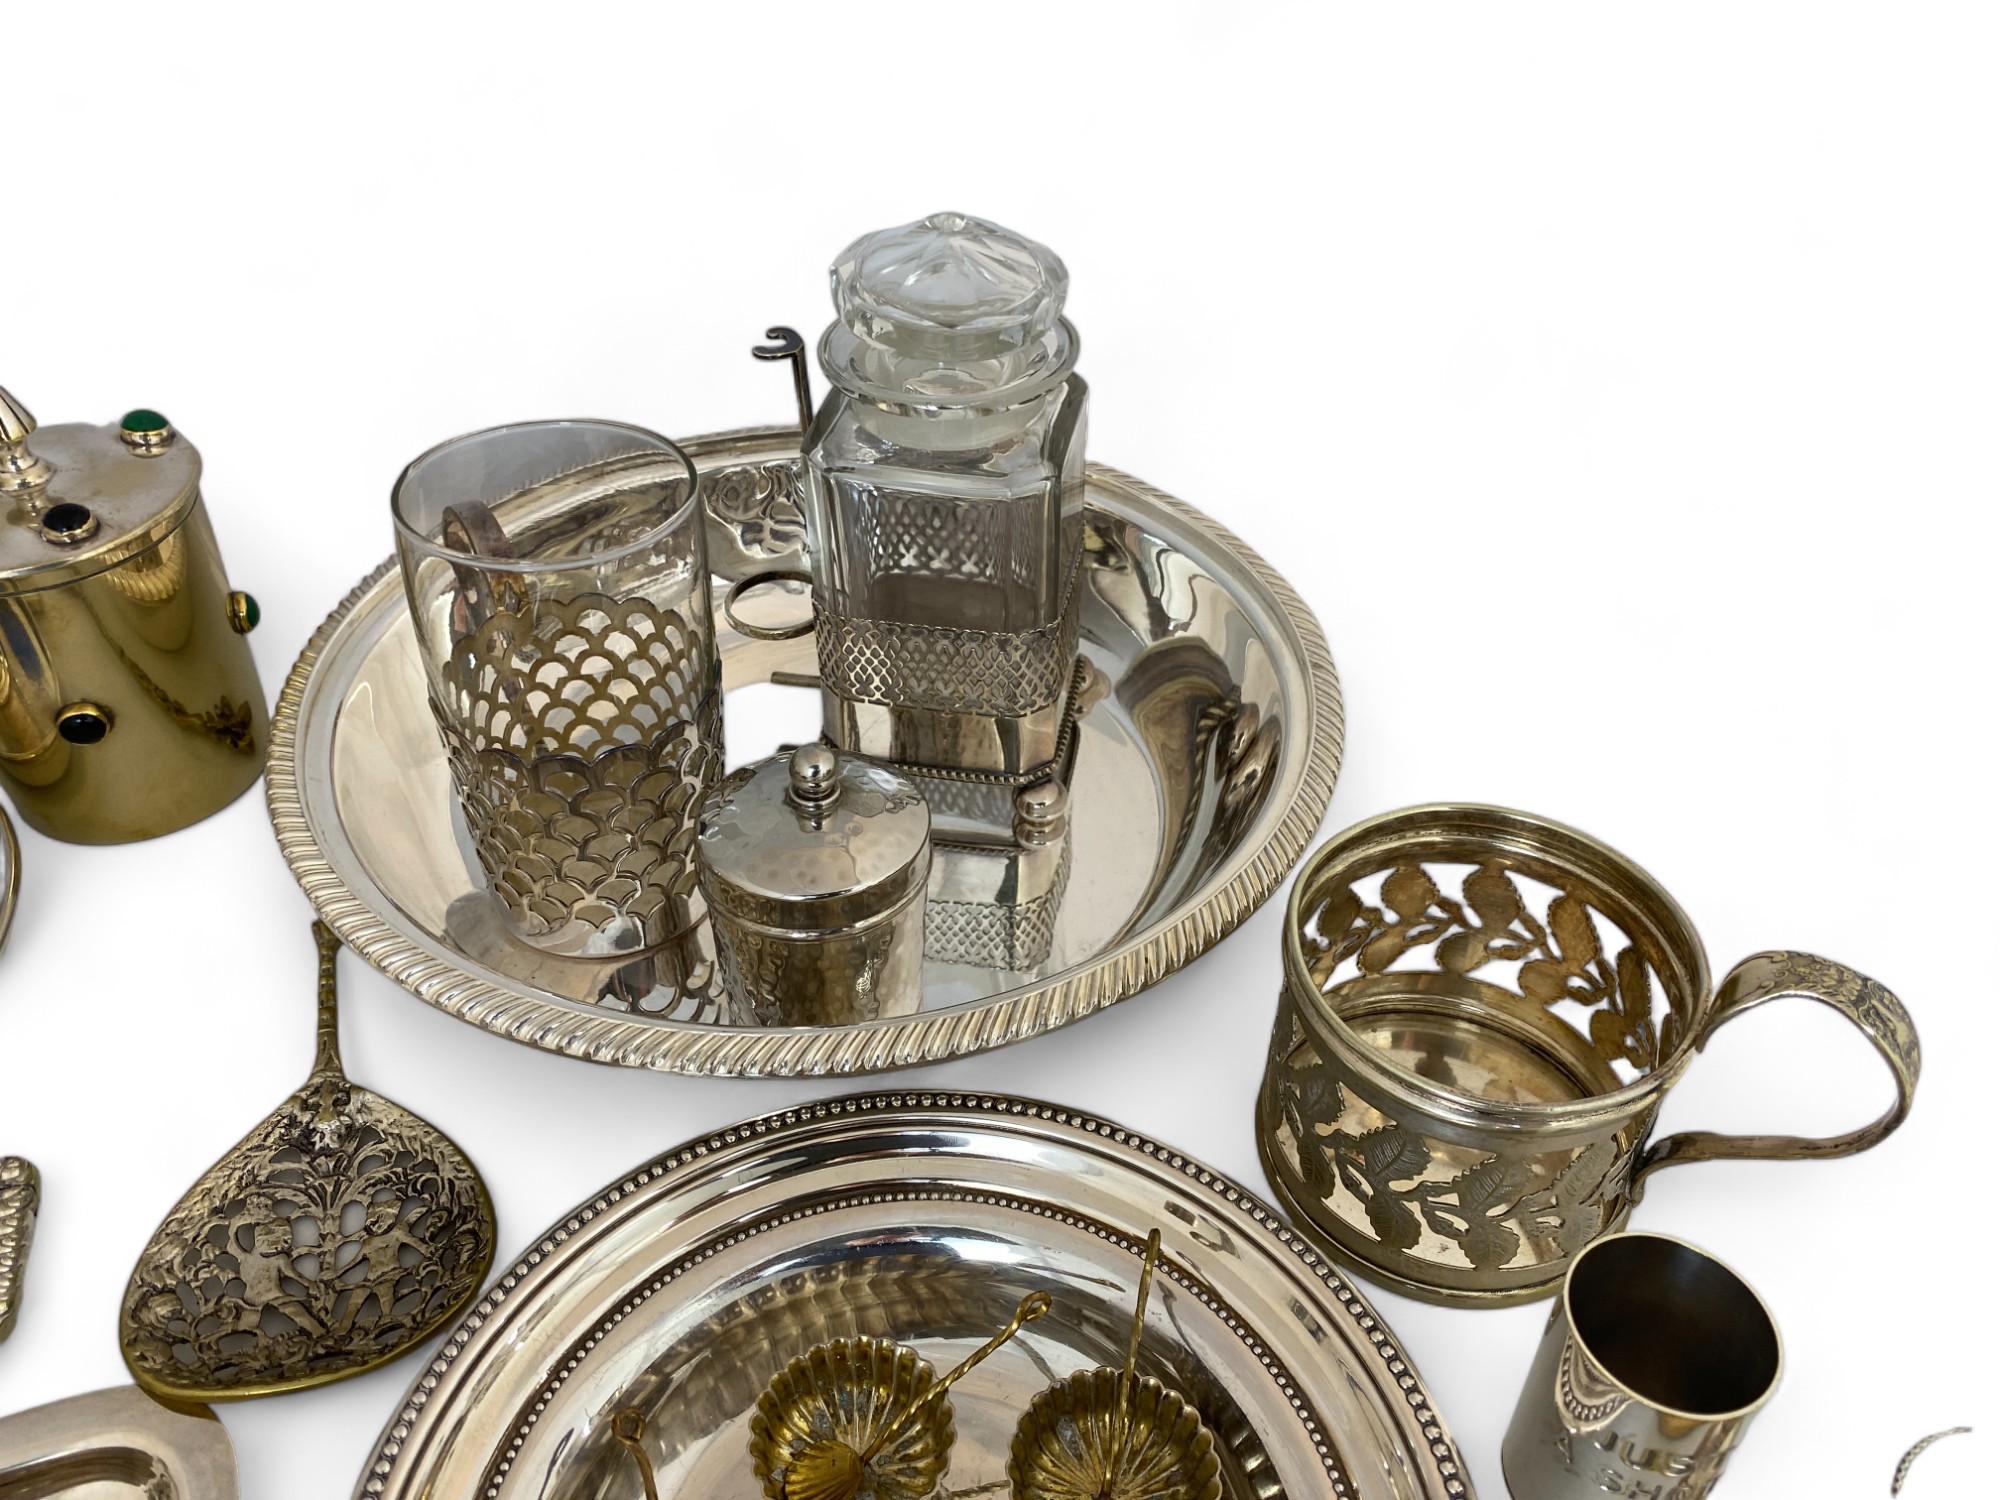 A group lot of silver plate and objects de vertu - Image 4 of 6